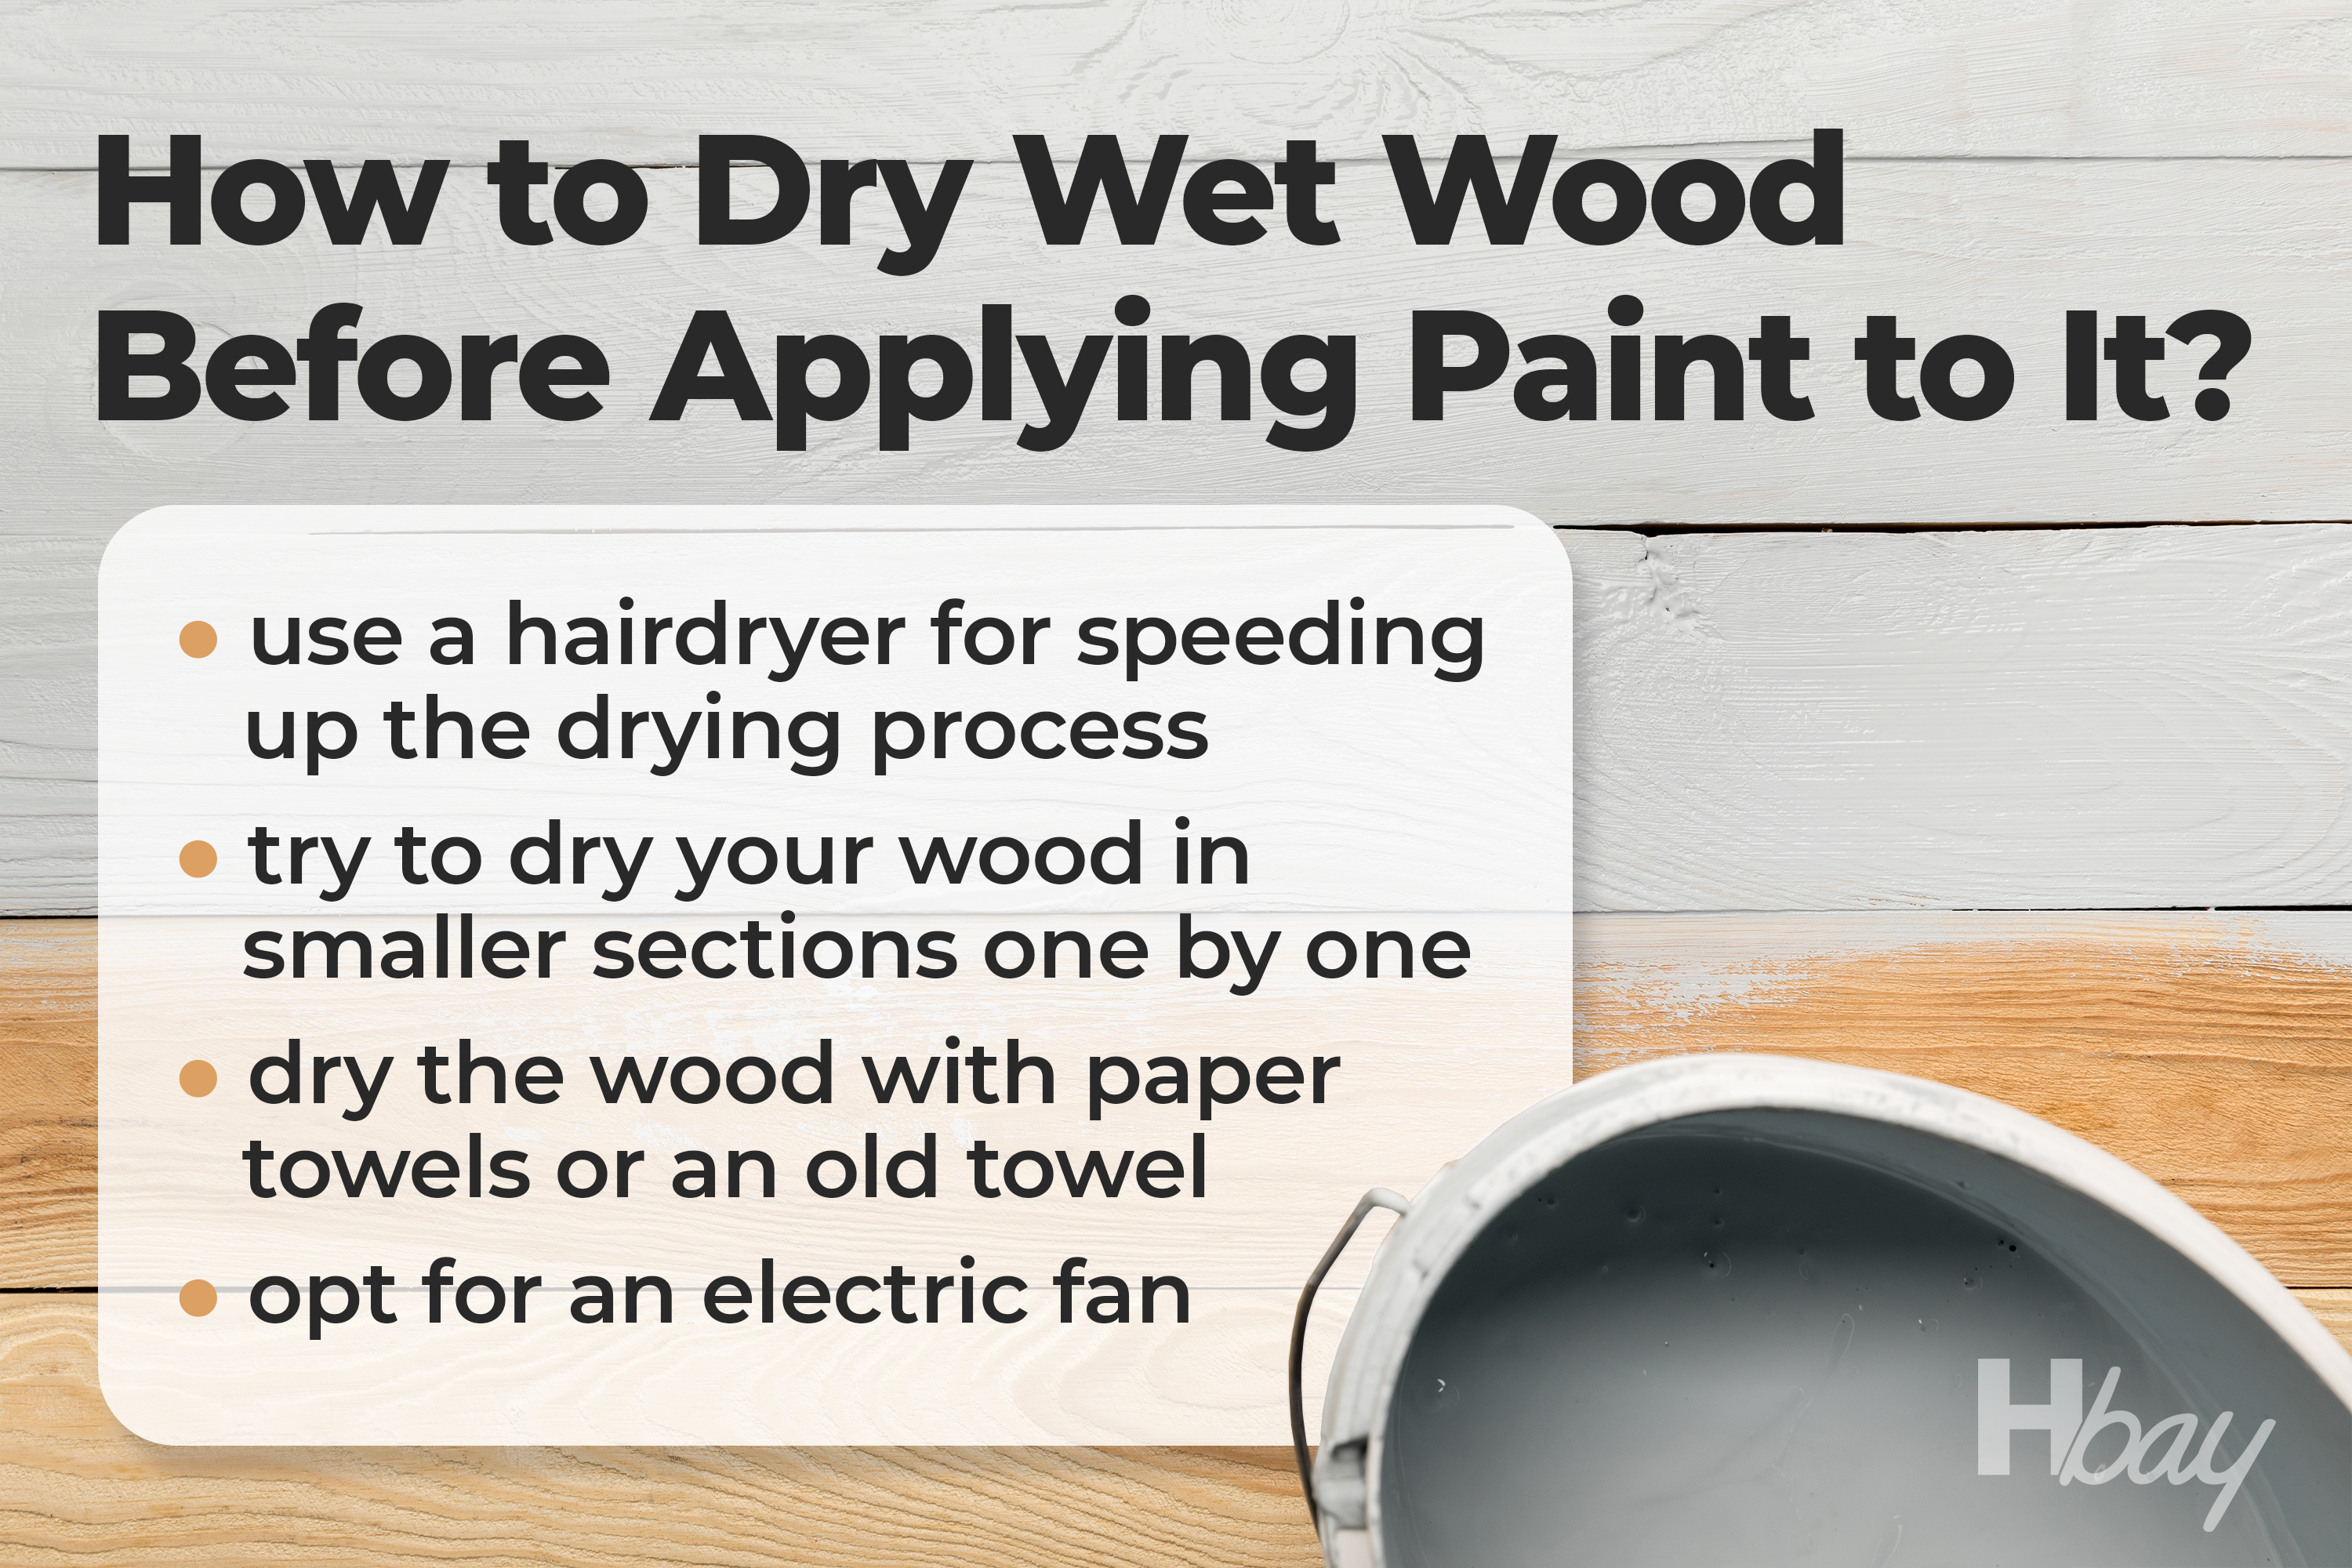 How to Dry Wet Wood Before Applying Paint to It